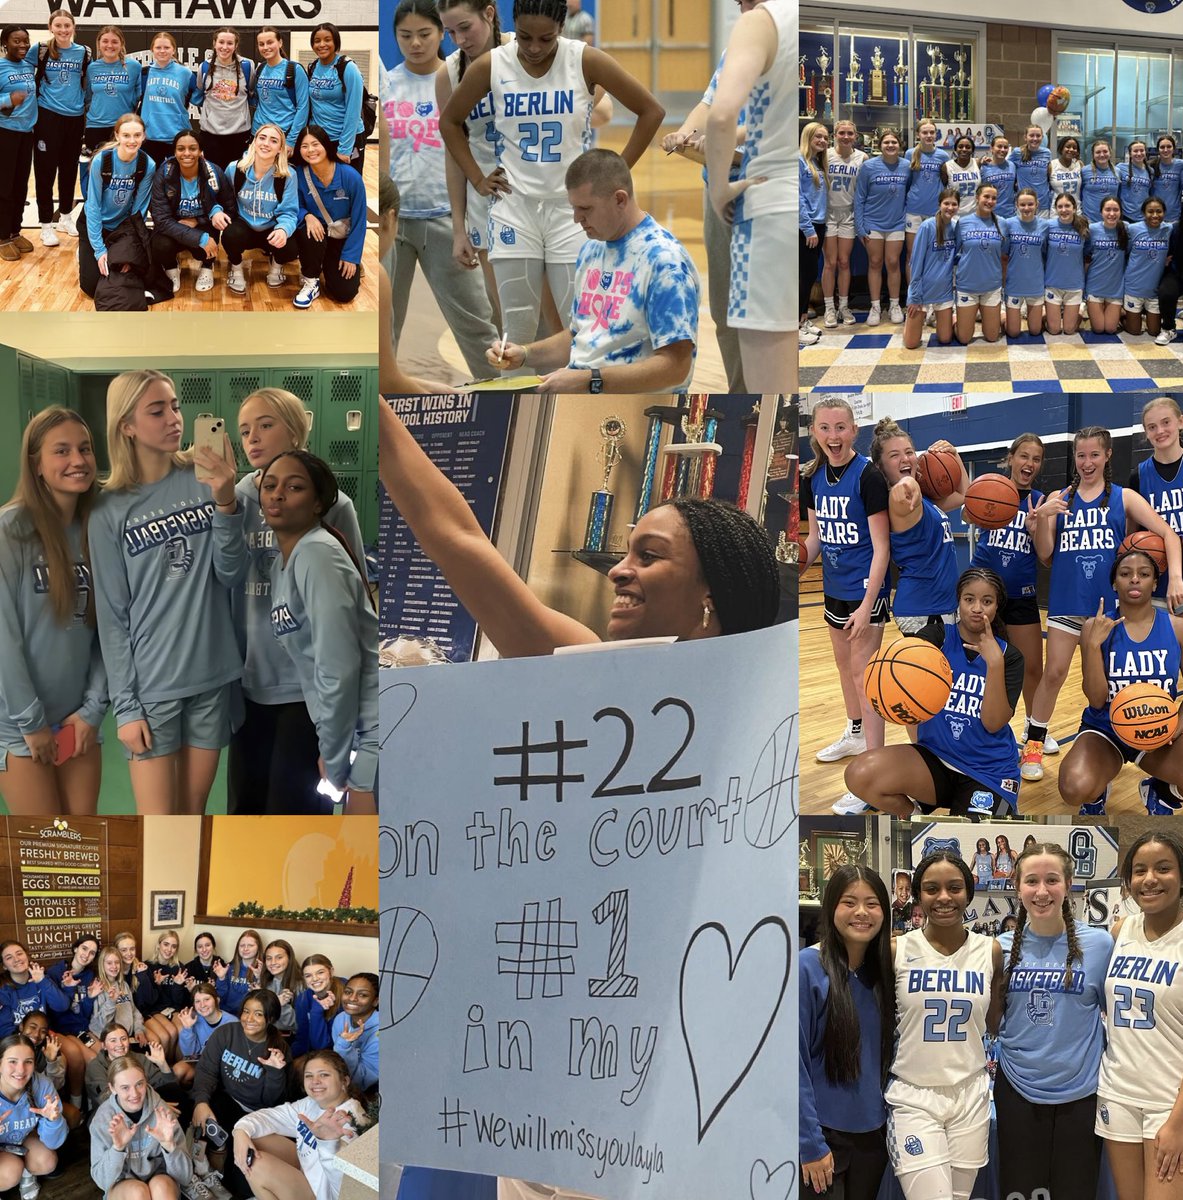 THANK YOU to my family, friends, coaches, trainers, teachers & everyone that has supported me these last 4 years. I can’t thank my teammates @ladybearsbbk enough for making it a great senior season. We broke records and had fun doing it! 🐻💙 Ready for my next chapter!💪🏽